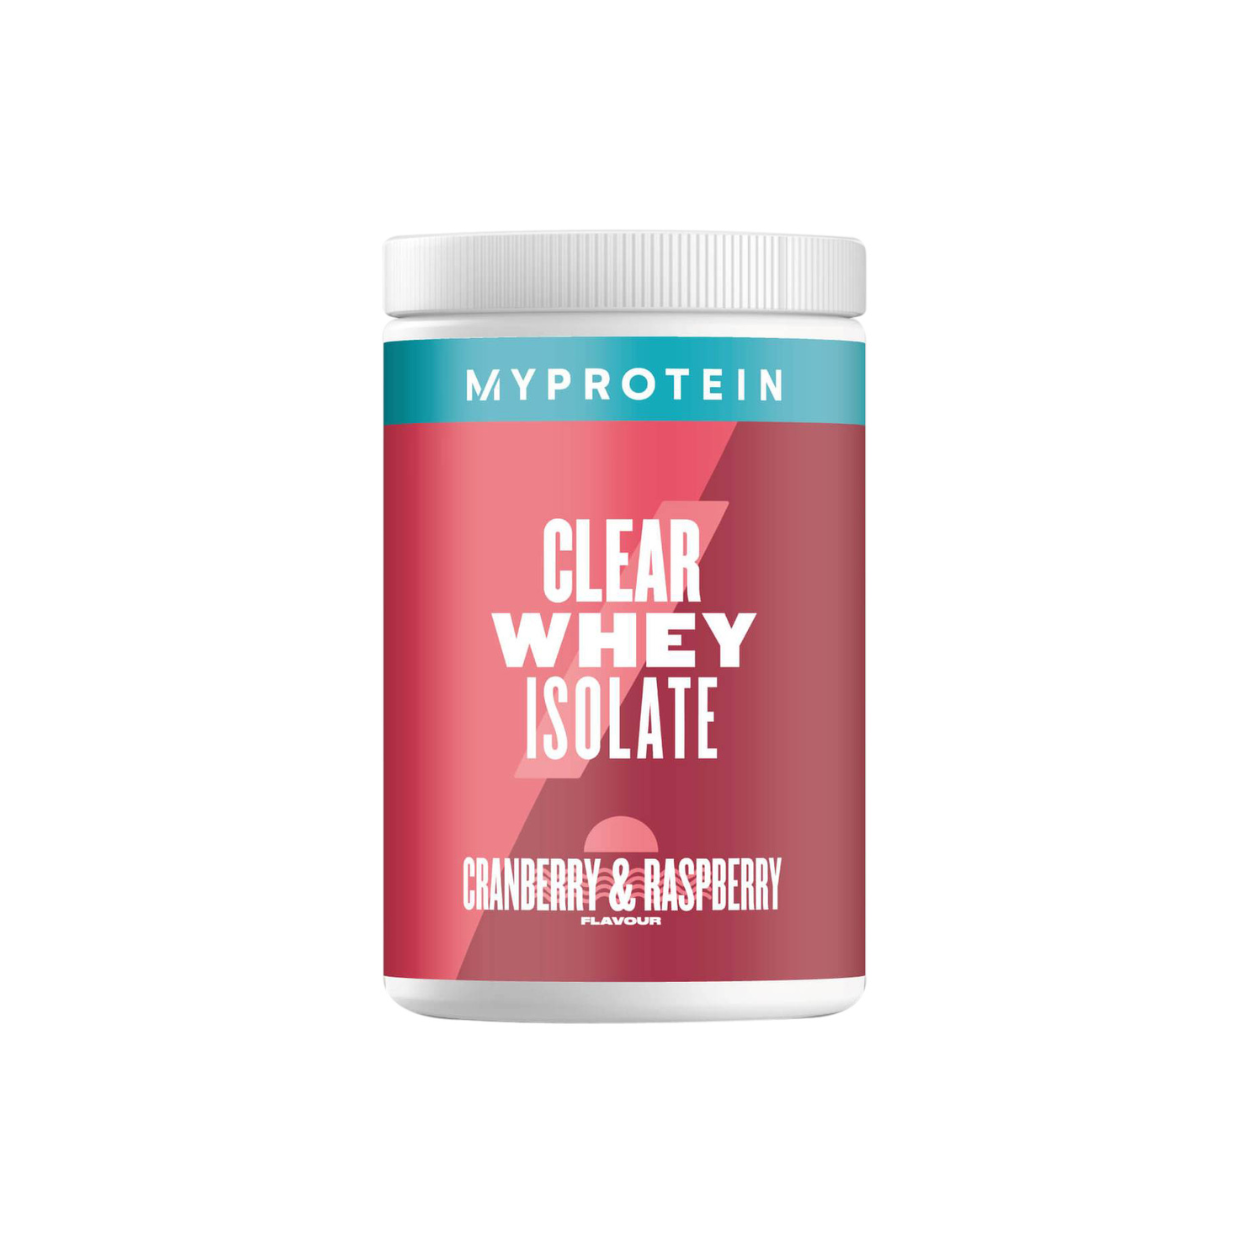 My Protein Clear Whey Isolate Cranberry & Raspberry (502g Dose)